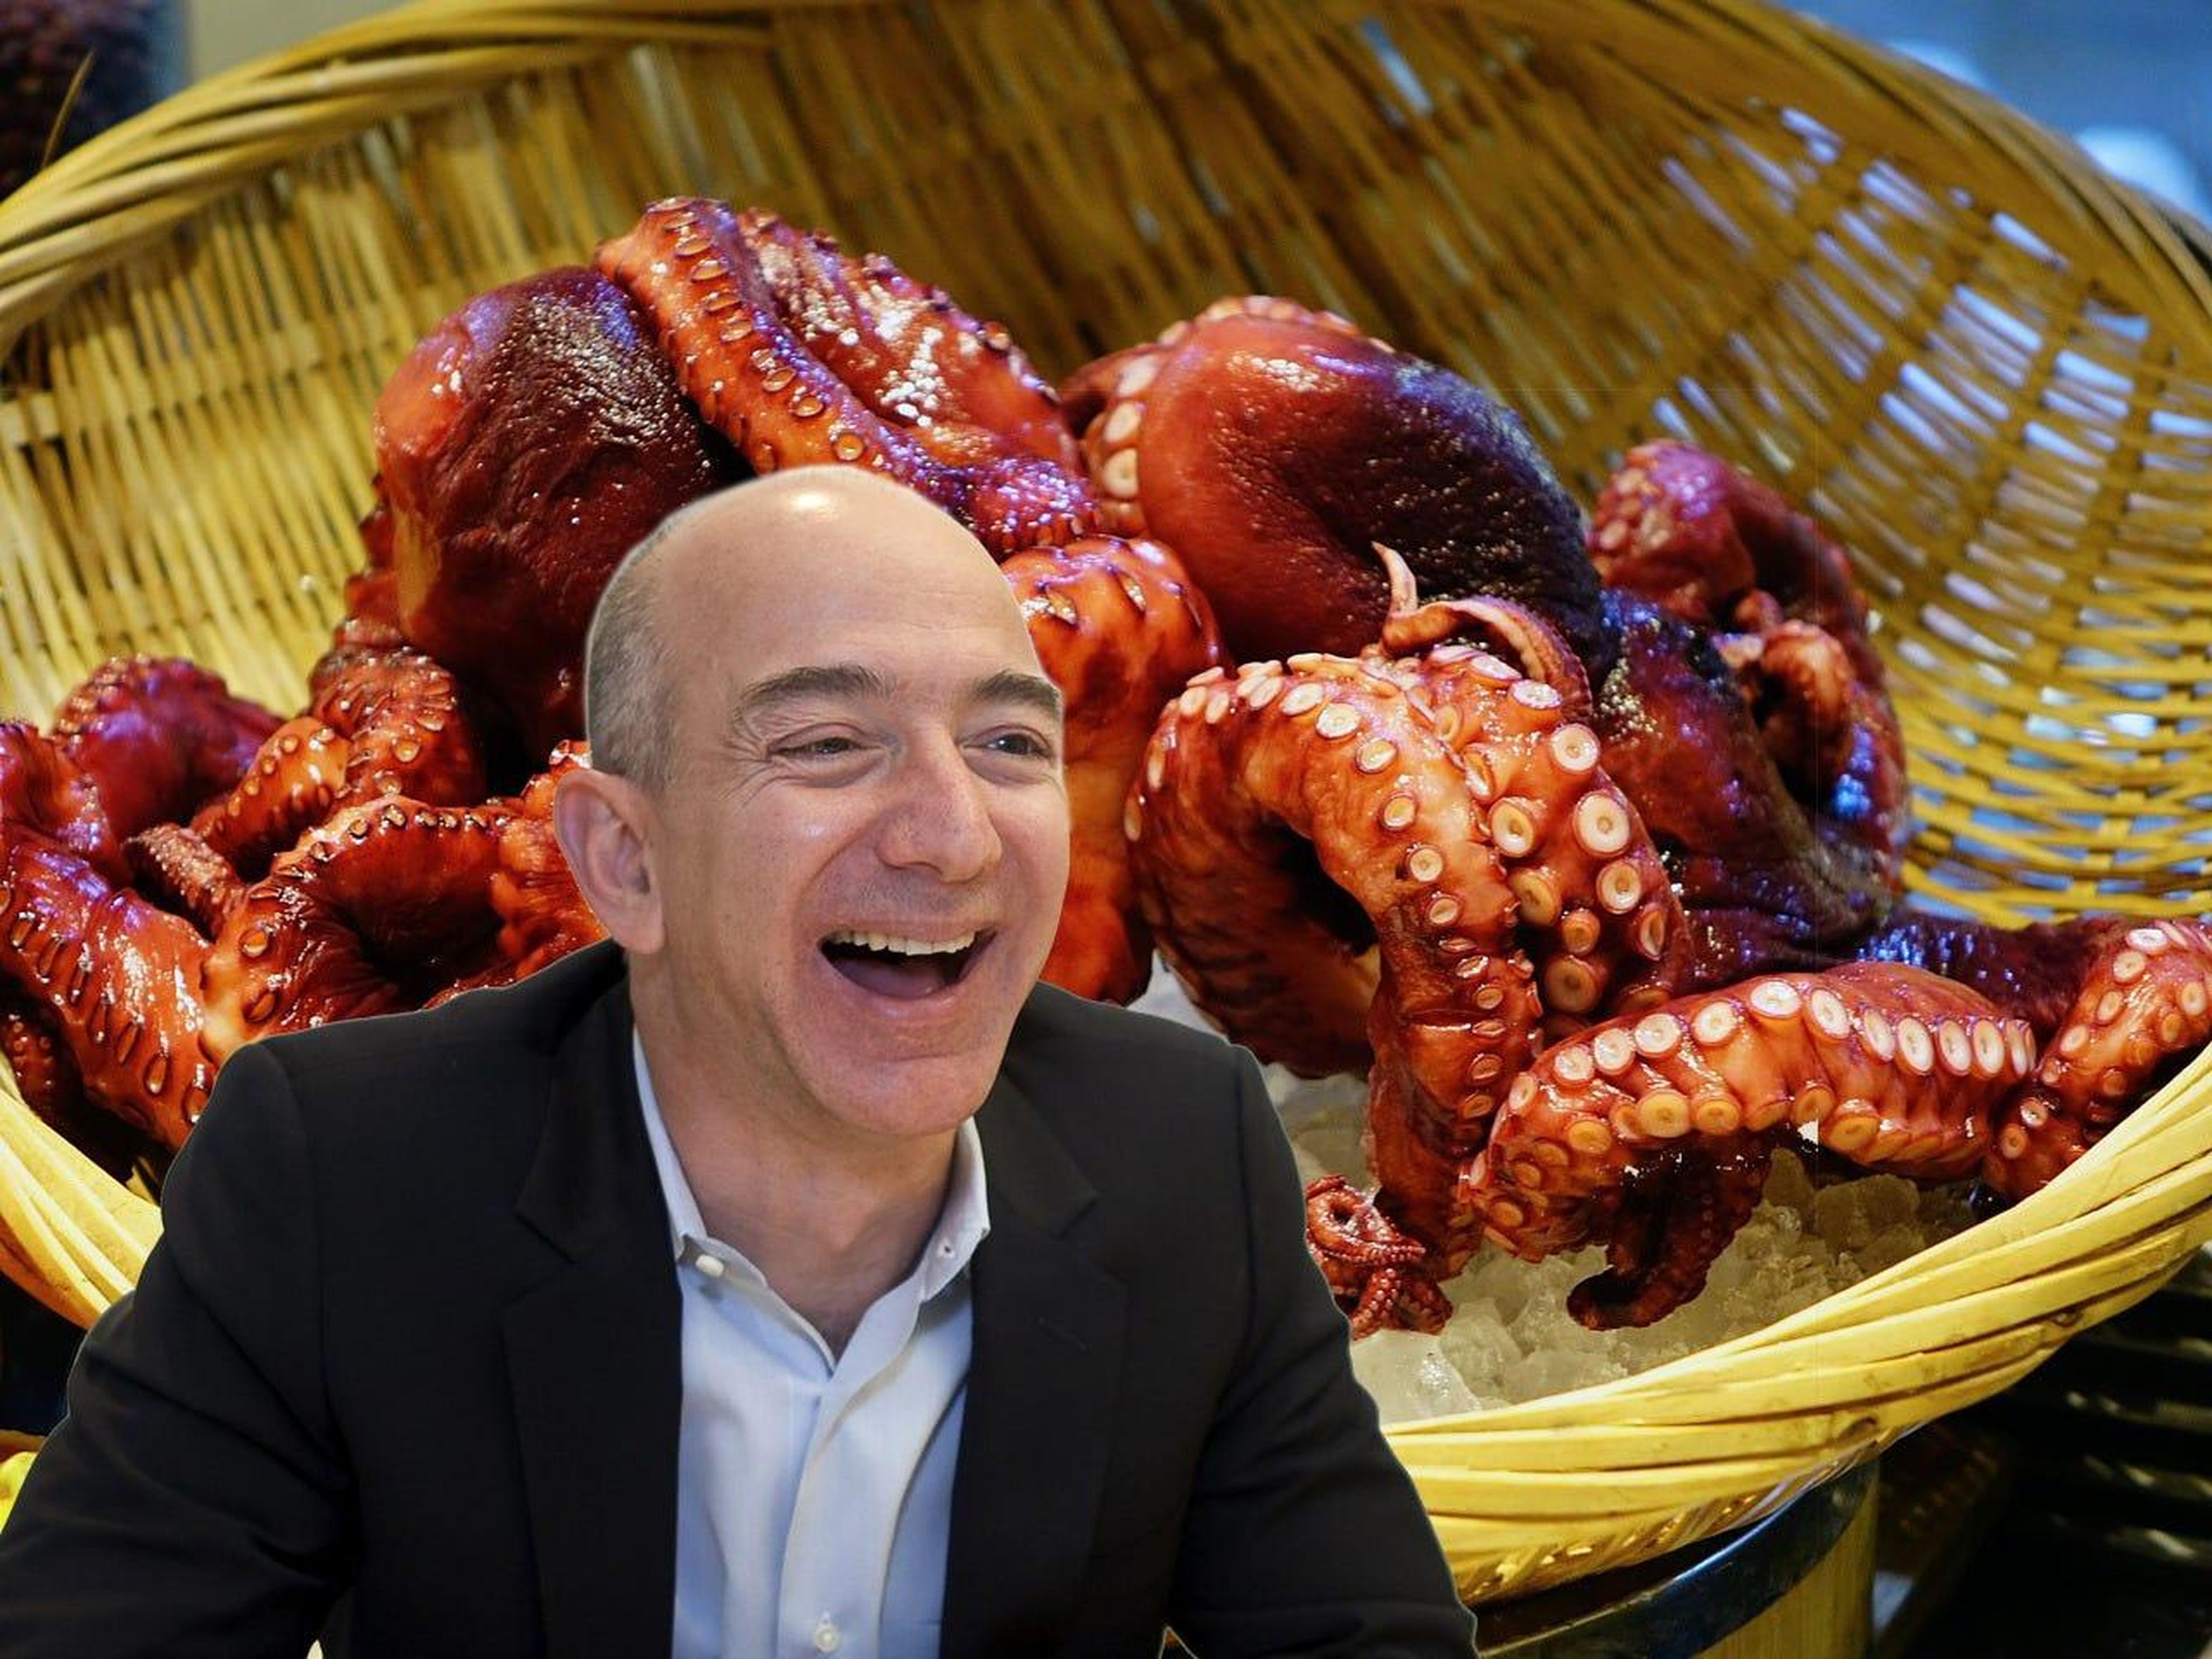 Billionaires are known for being eccentric, and that doesn't stop with their eating choices. In a meeting with a company Amazon had considered (and eventually went through with) acquiring, Bezos reportedly ordered a breakfast of